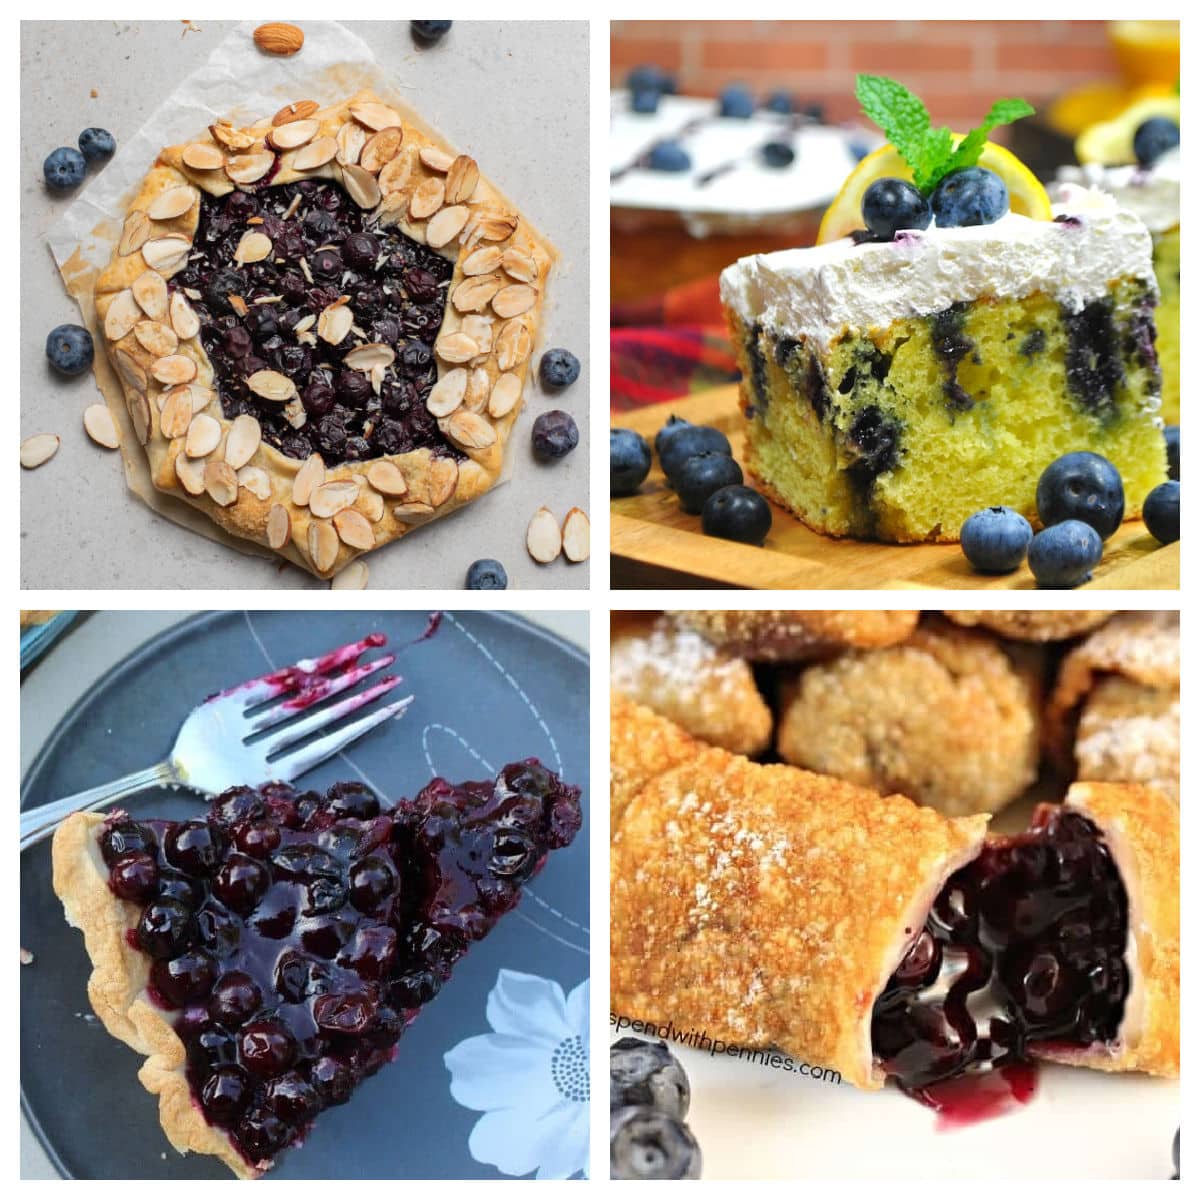 Collage of blueberry desserts.